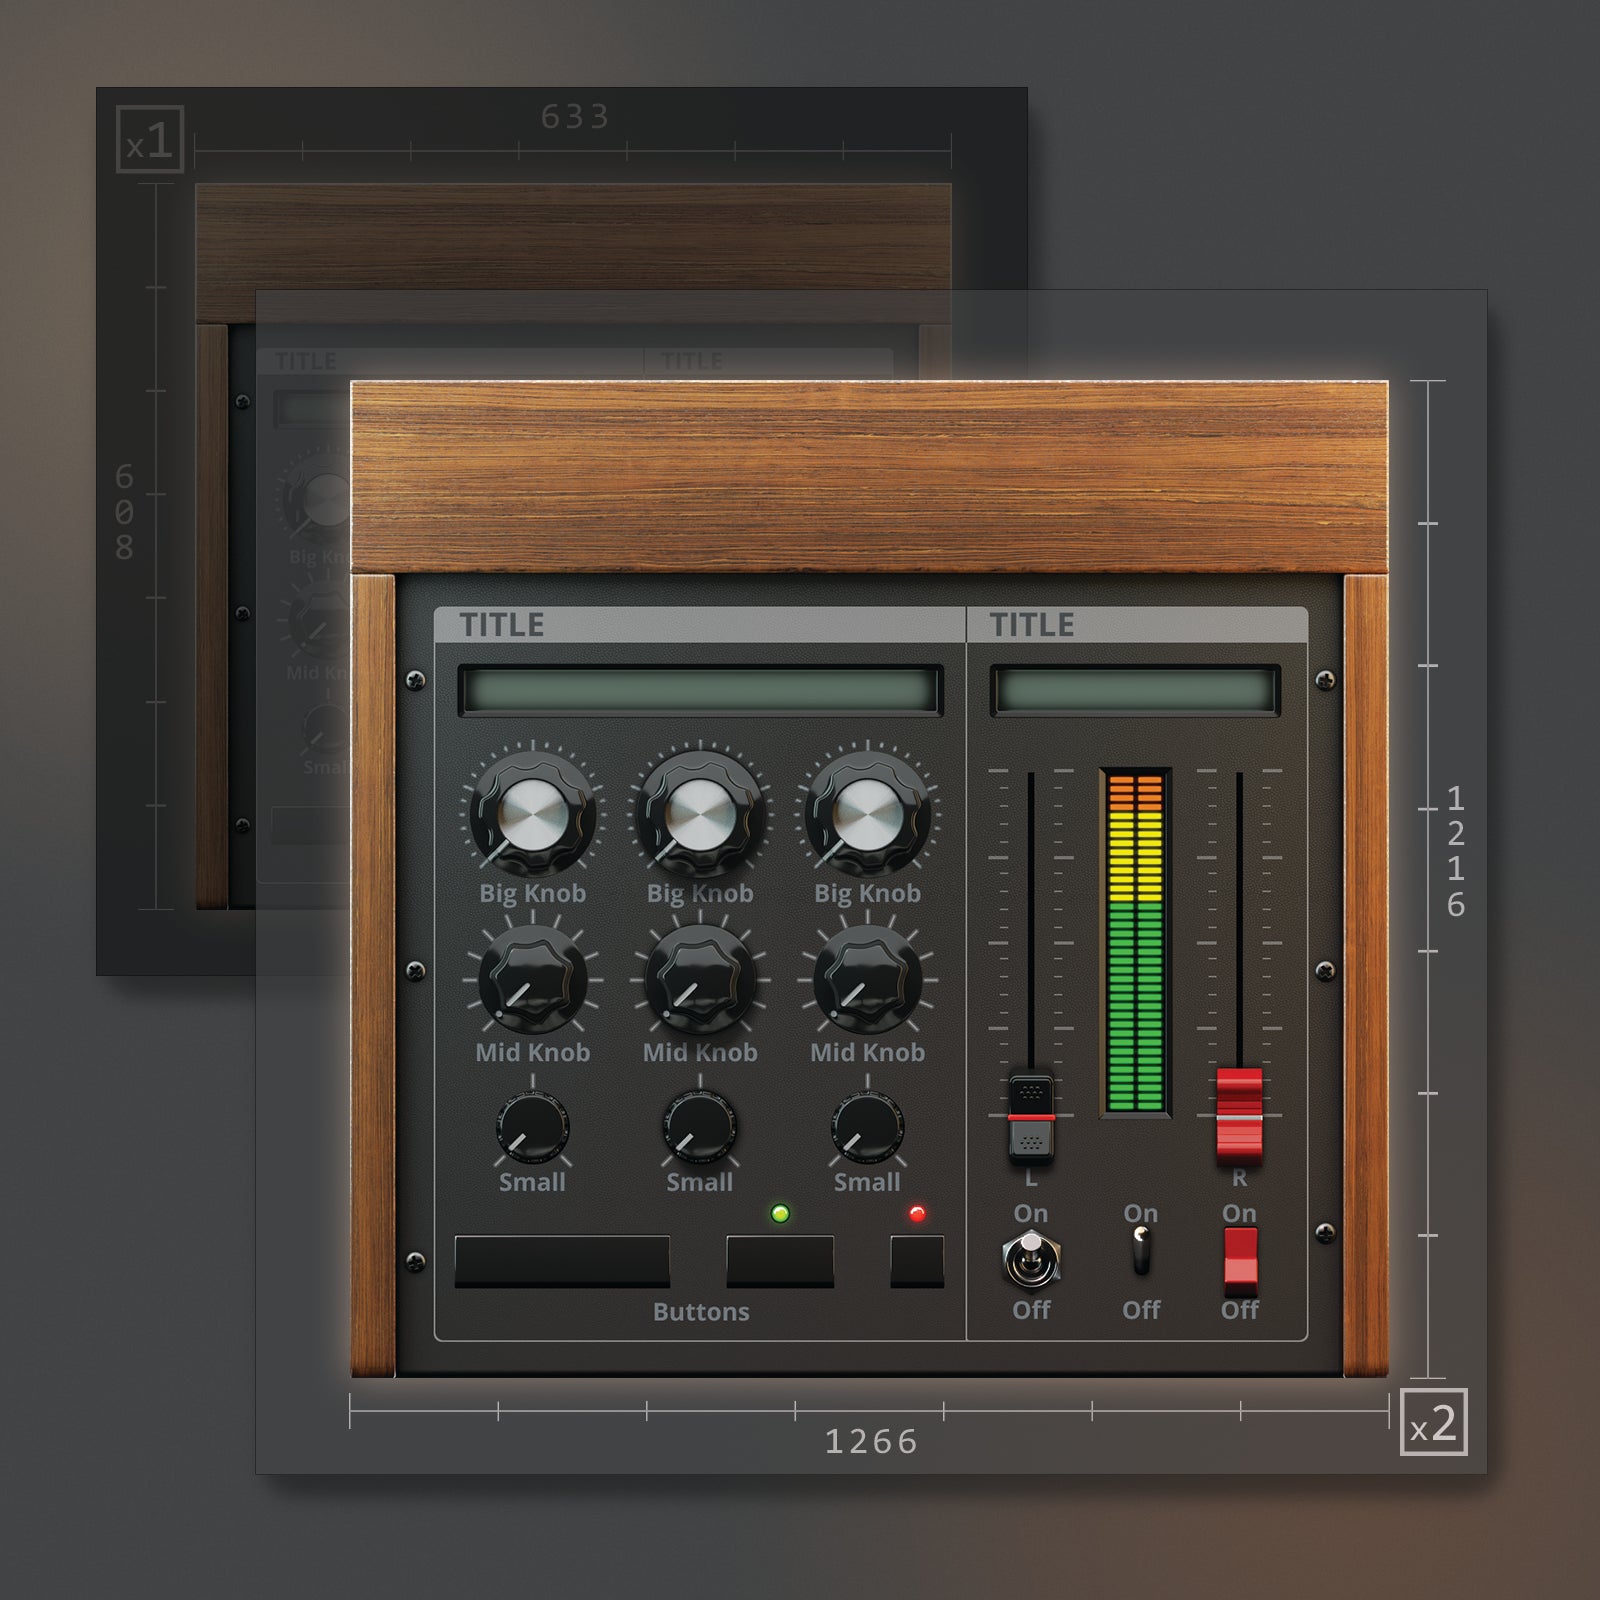 1 resolutions of Moog styled UI template VST 1266x1216